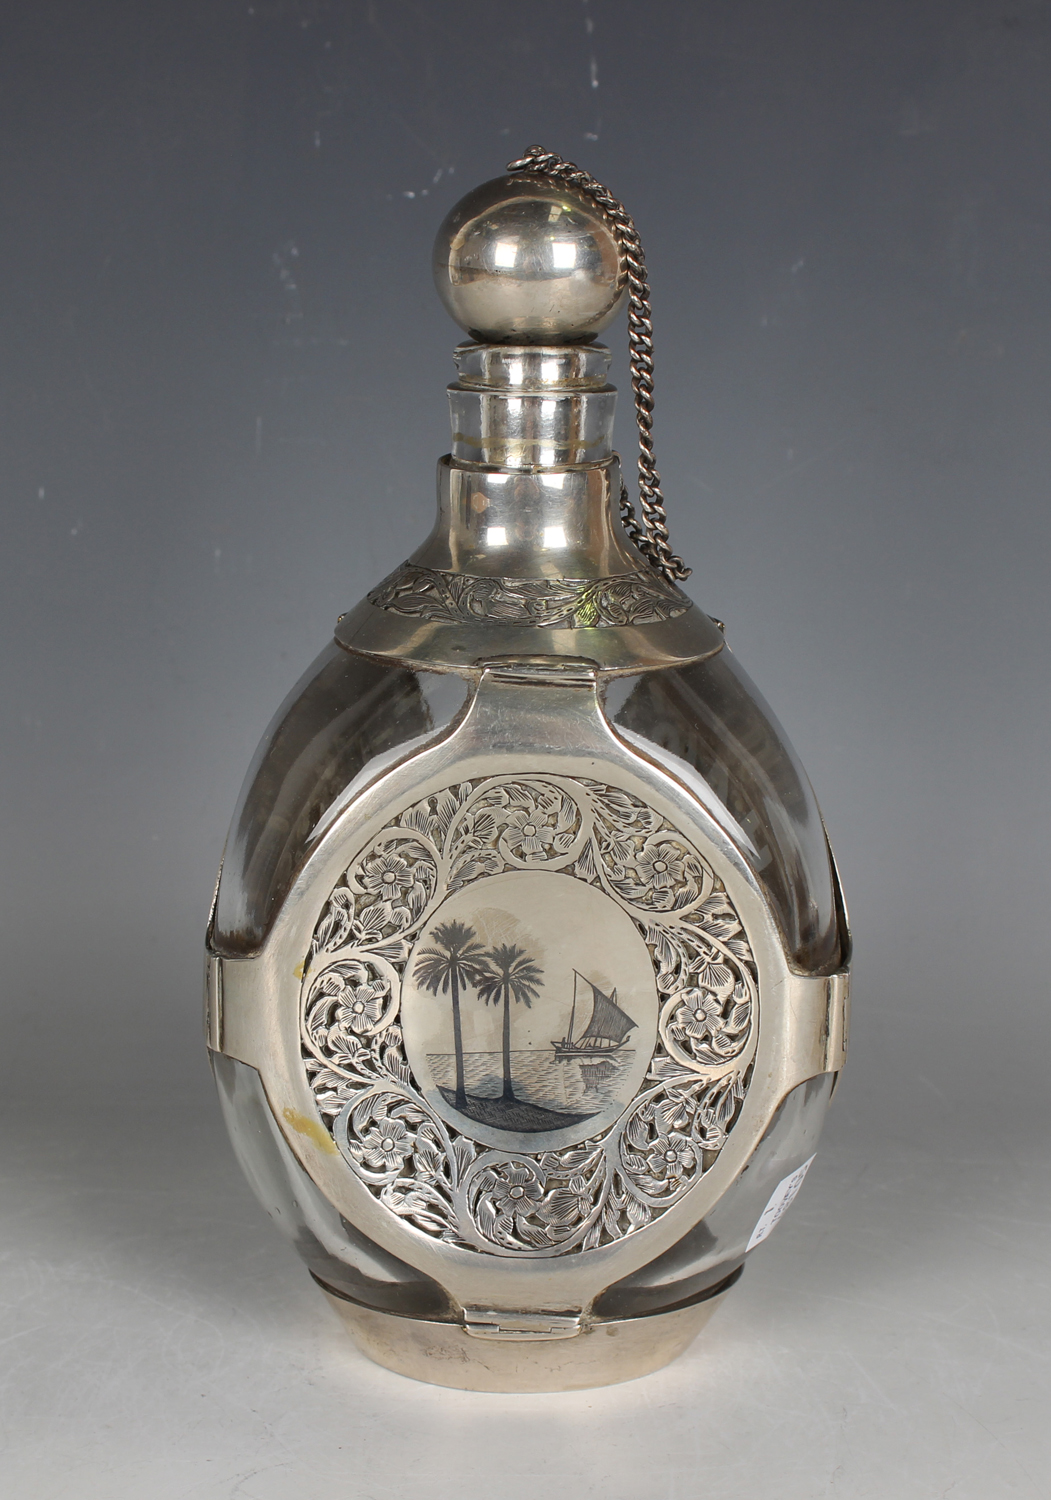 A Haig's whisky silver mounted clear glass dimple decanter and stopper, the three dimpled sides each - Image 5 of 5